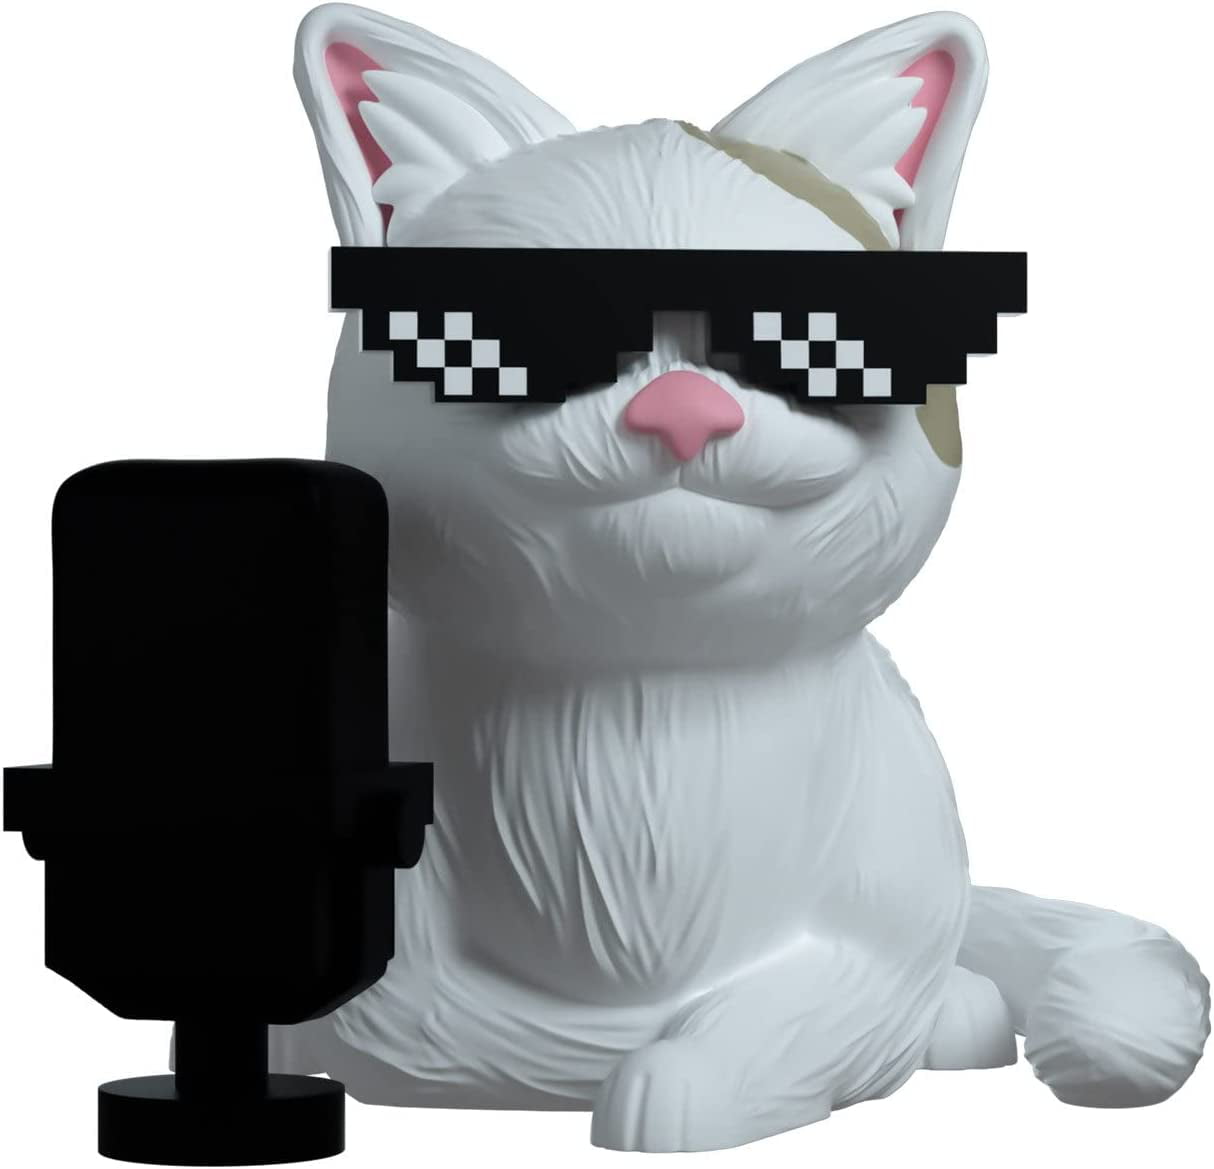 Beluga on X: RT + follow @youtooz for a chance to win a beluga cat!!  picking winners march 29 when it drops ^–^  / X